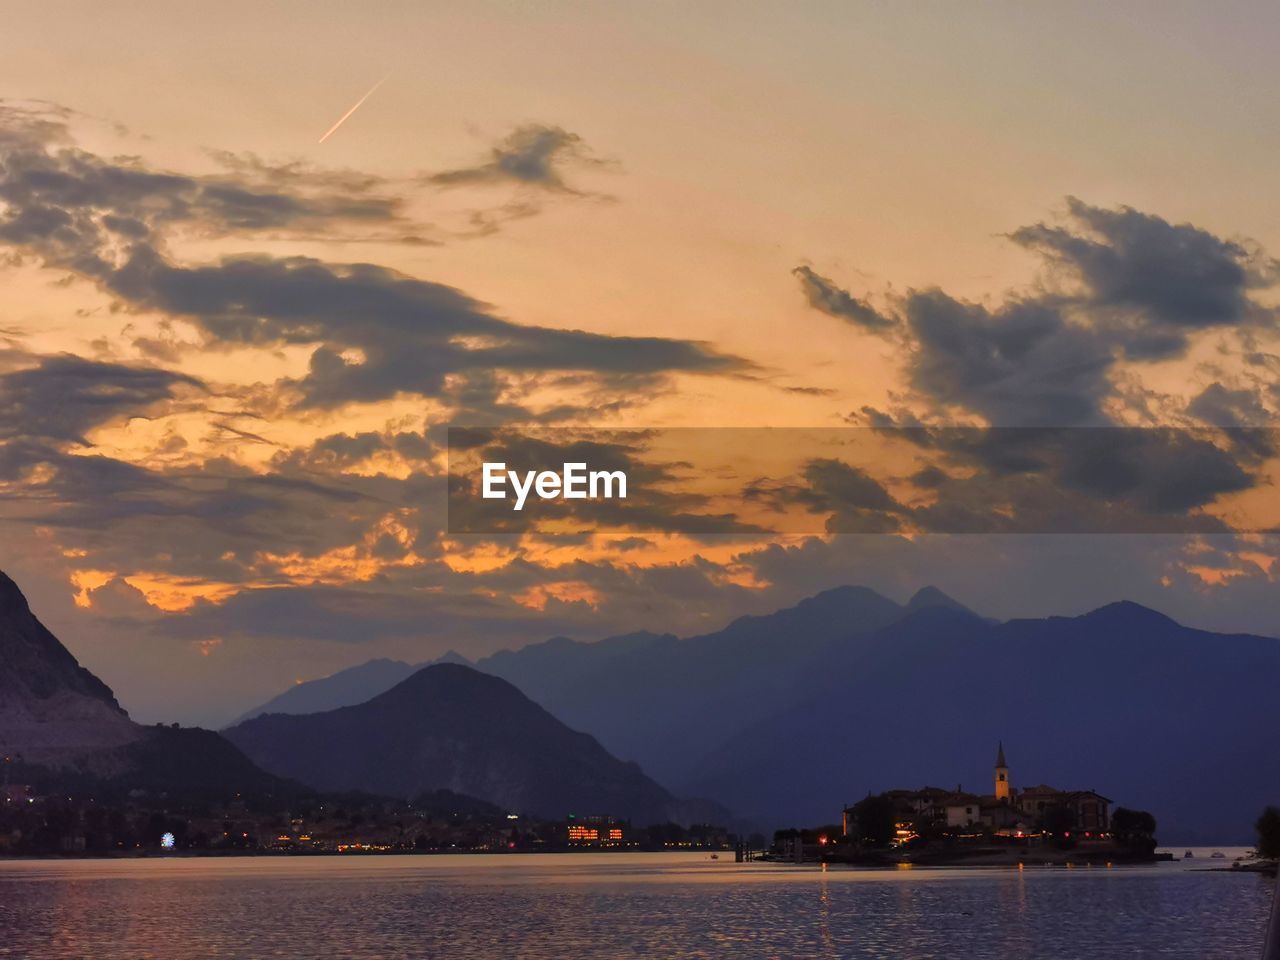 mountain, sky, water, sunset, dawn, cloud, nature, scenics - nature, beauty in nature, mountain range, evening, sea, horizon, travel destinations, architecture, landscape, afterglow, environment, travel, tranquility, no people, reflection, land, city, outdoors, nautical vessel, bay, transportation, tranquil scene, night, dramatic sky, tourism, twilight, holiday, idyllic